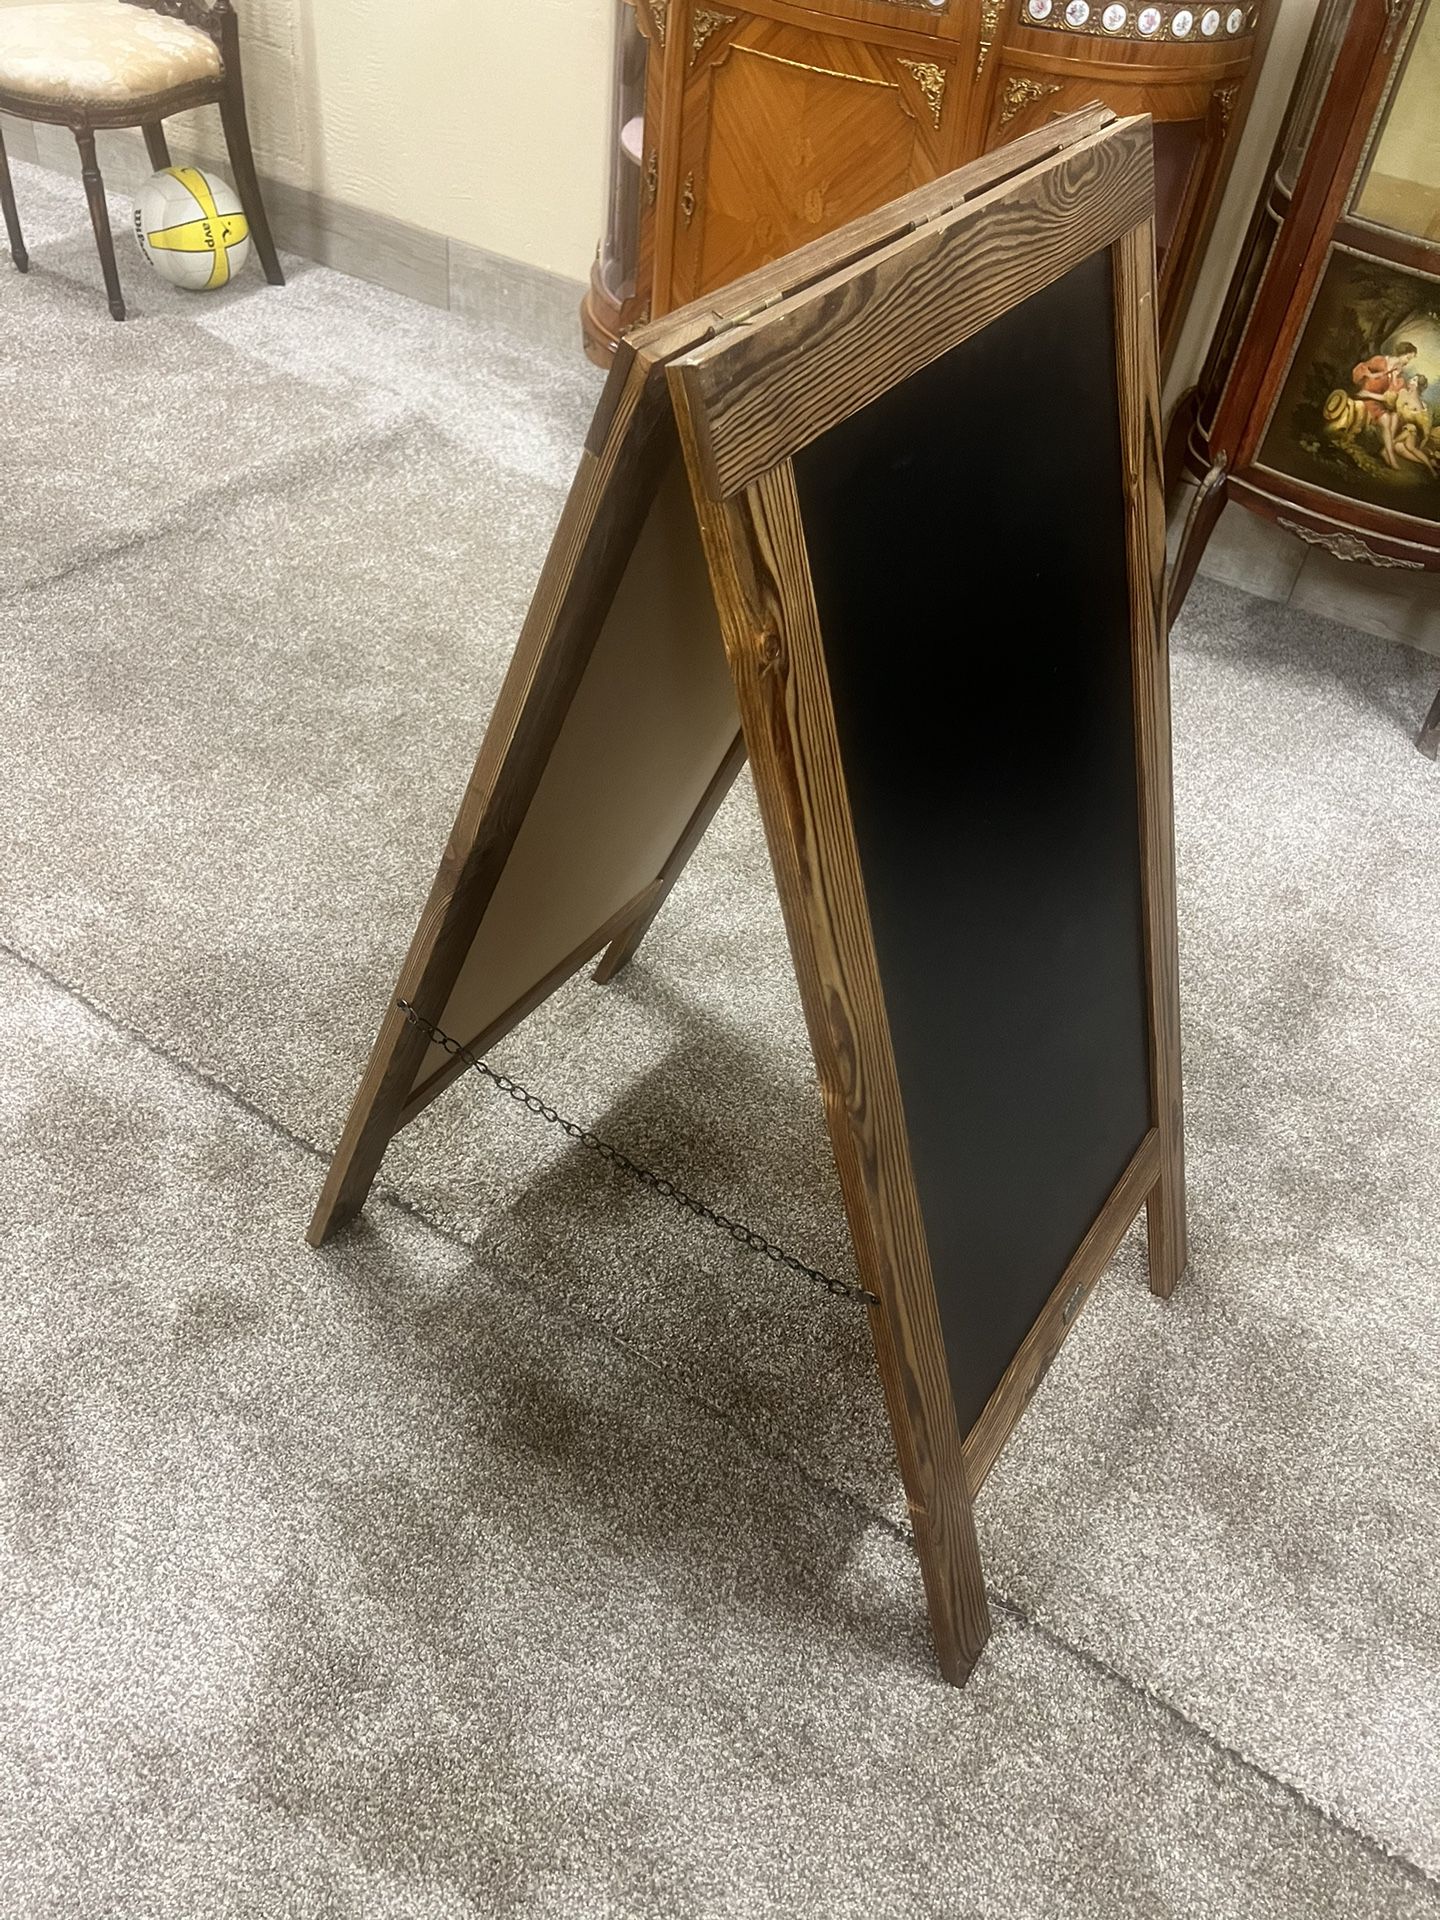 A-Frame Chalkboard Sign, Freestanding Double Sided